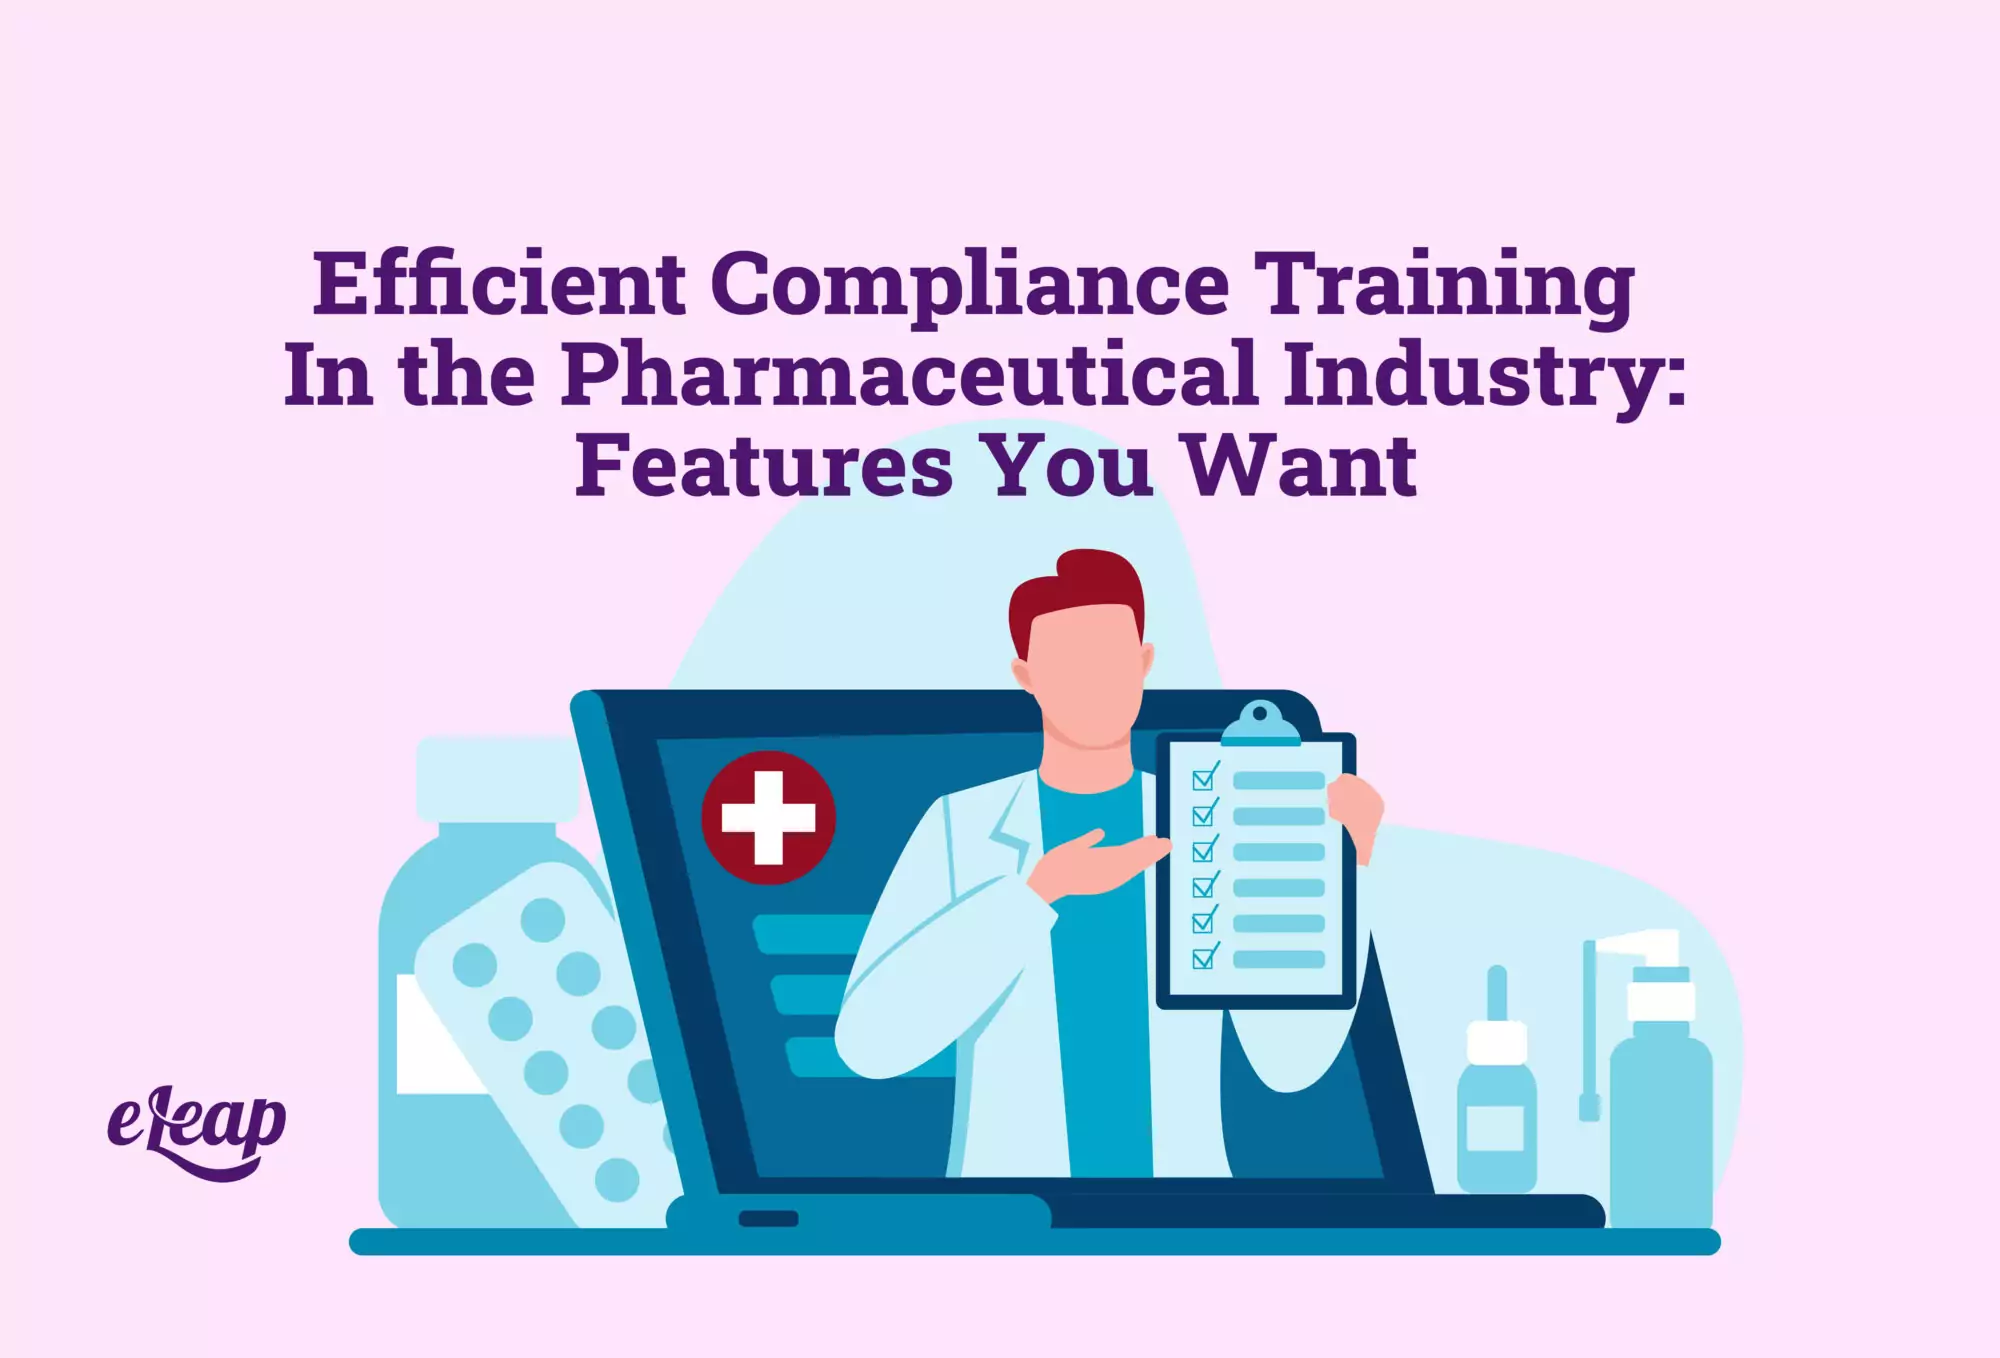 Efficient Compliance Training In the Pharmaceutical Industry: Features You Want